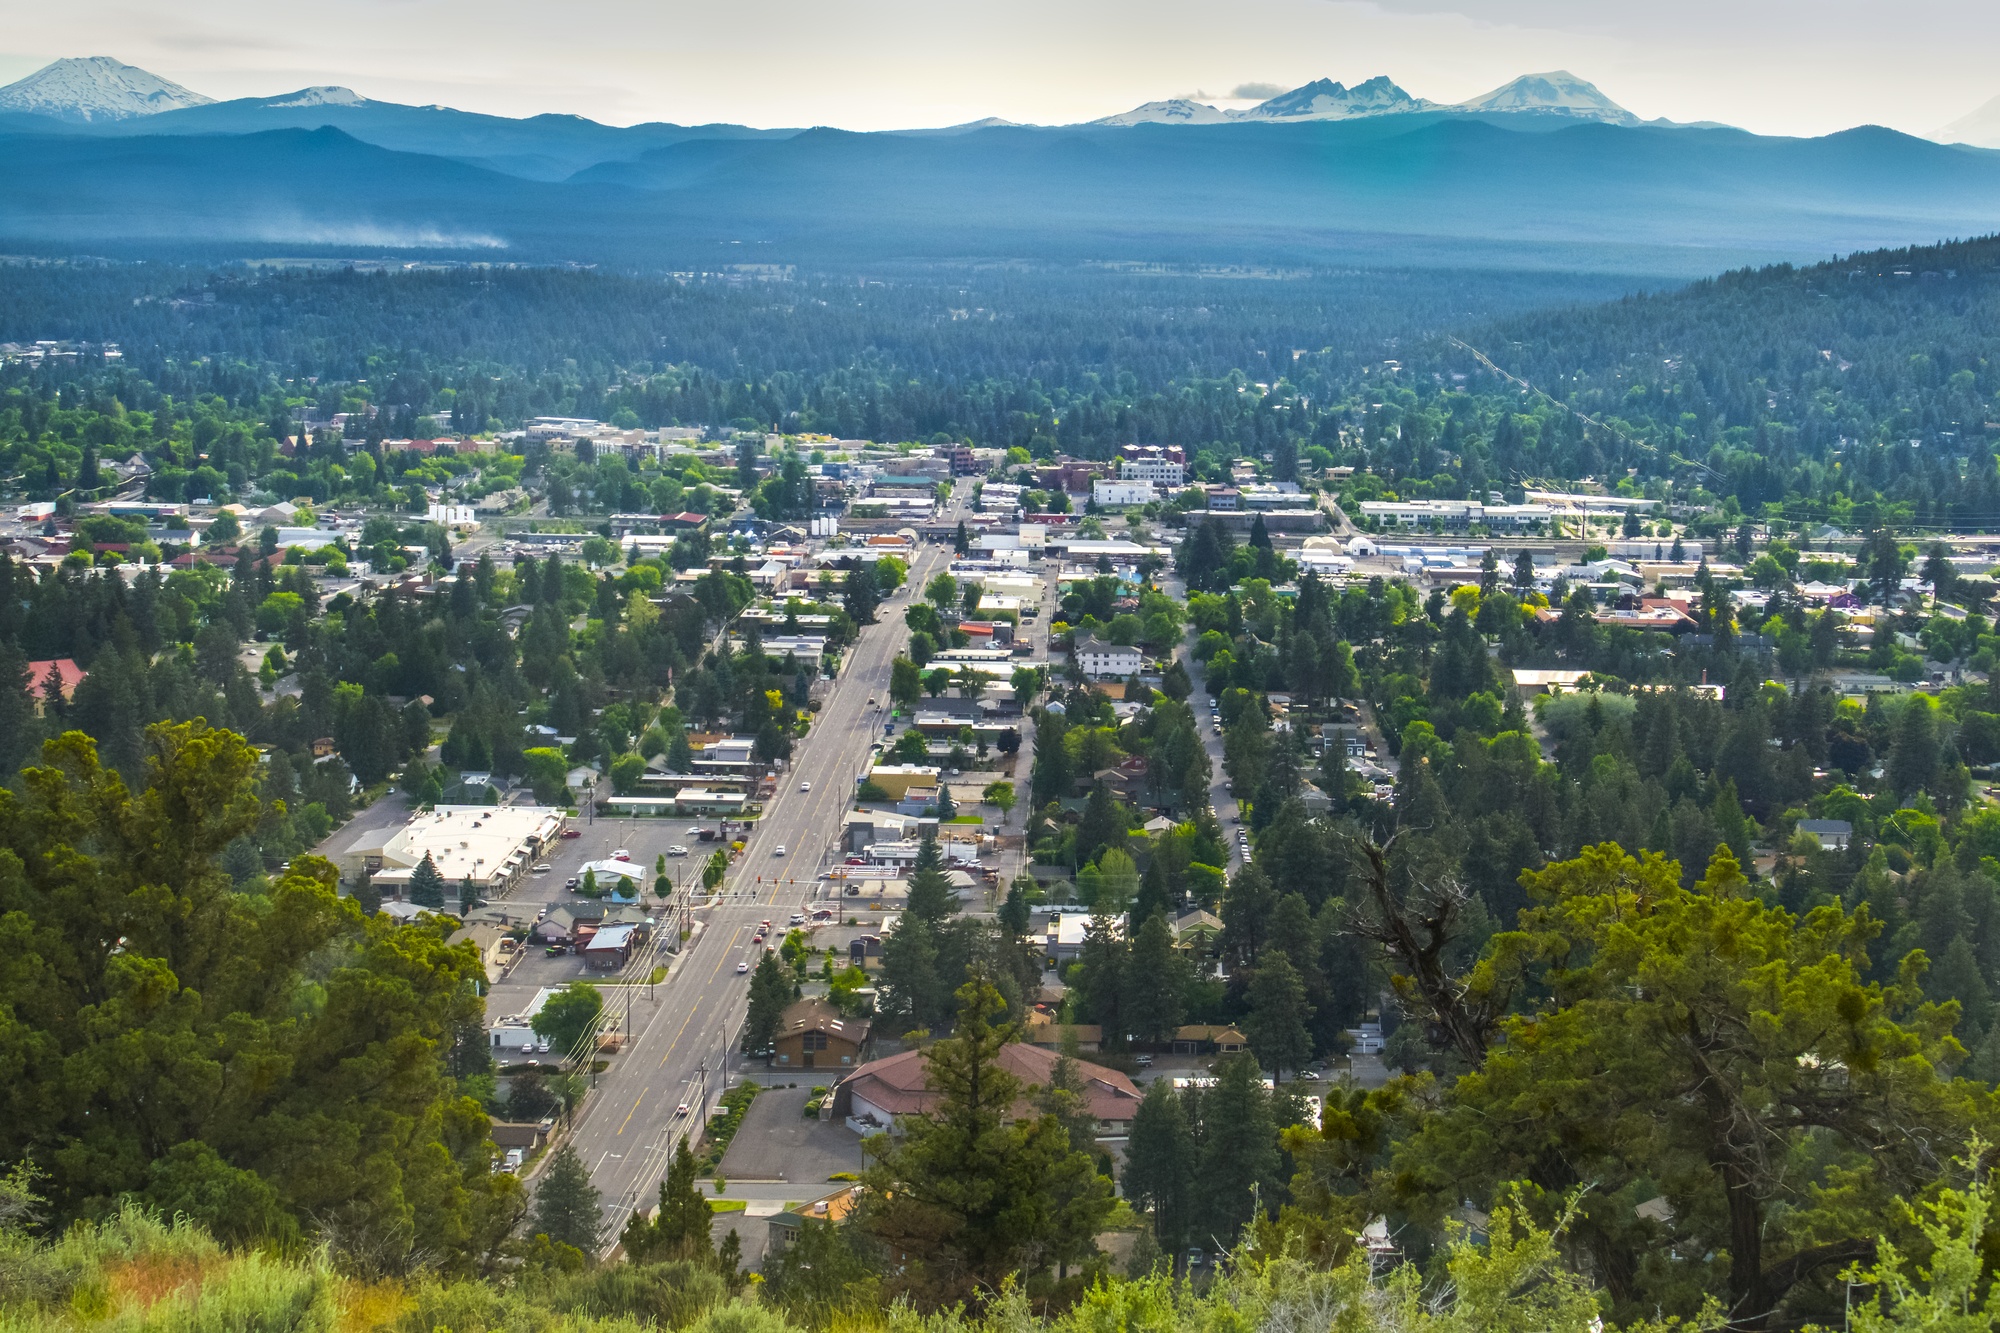 City of Bend, Oregon With Scenic Mountains in Distance 110221.